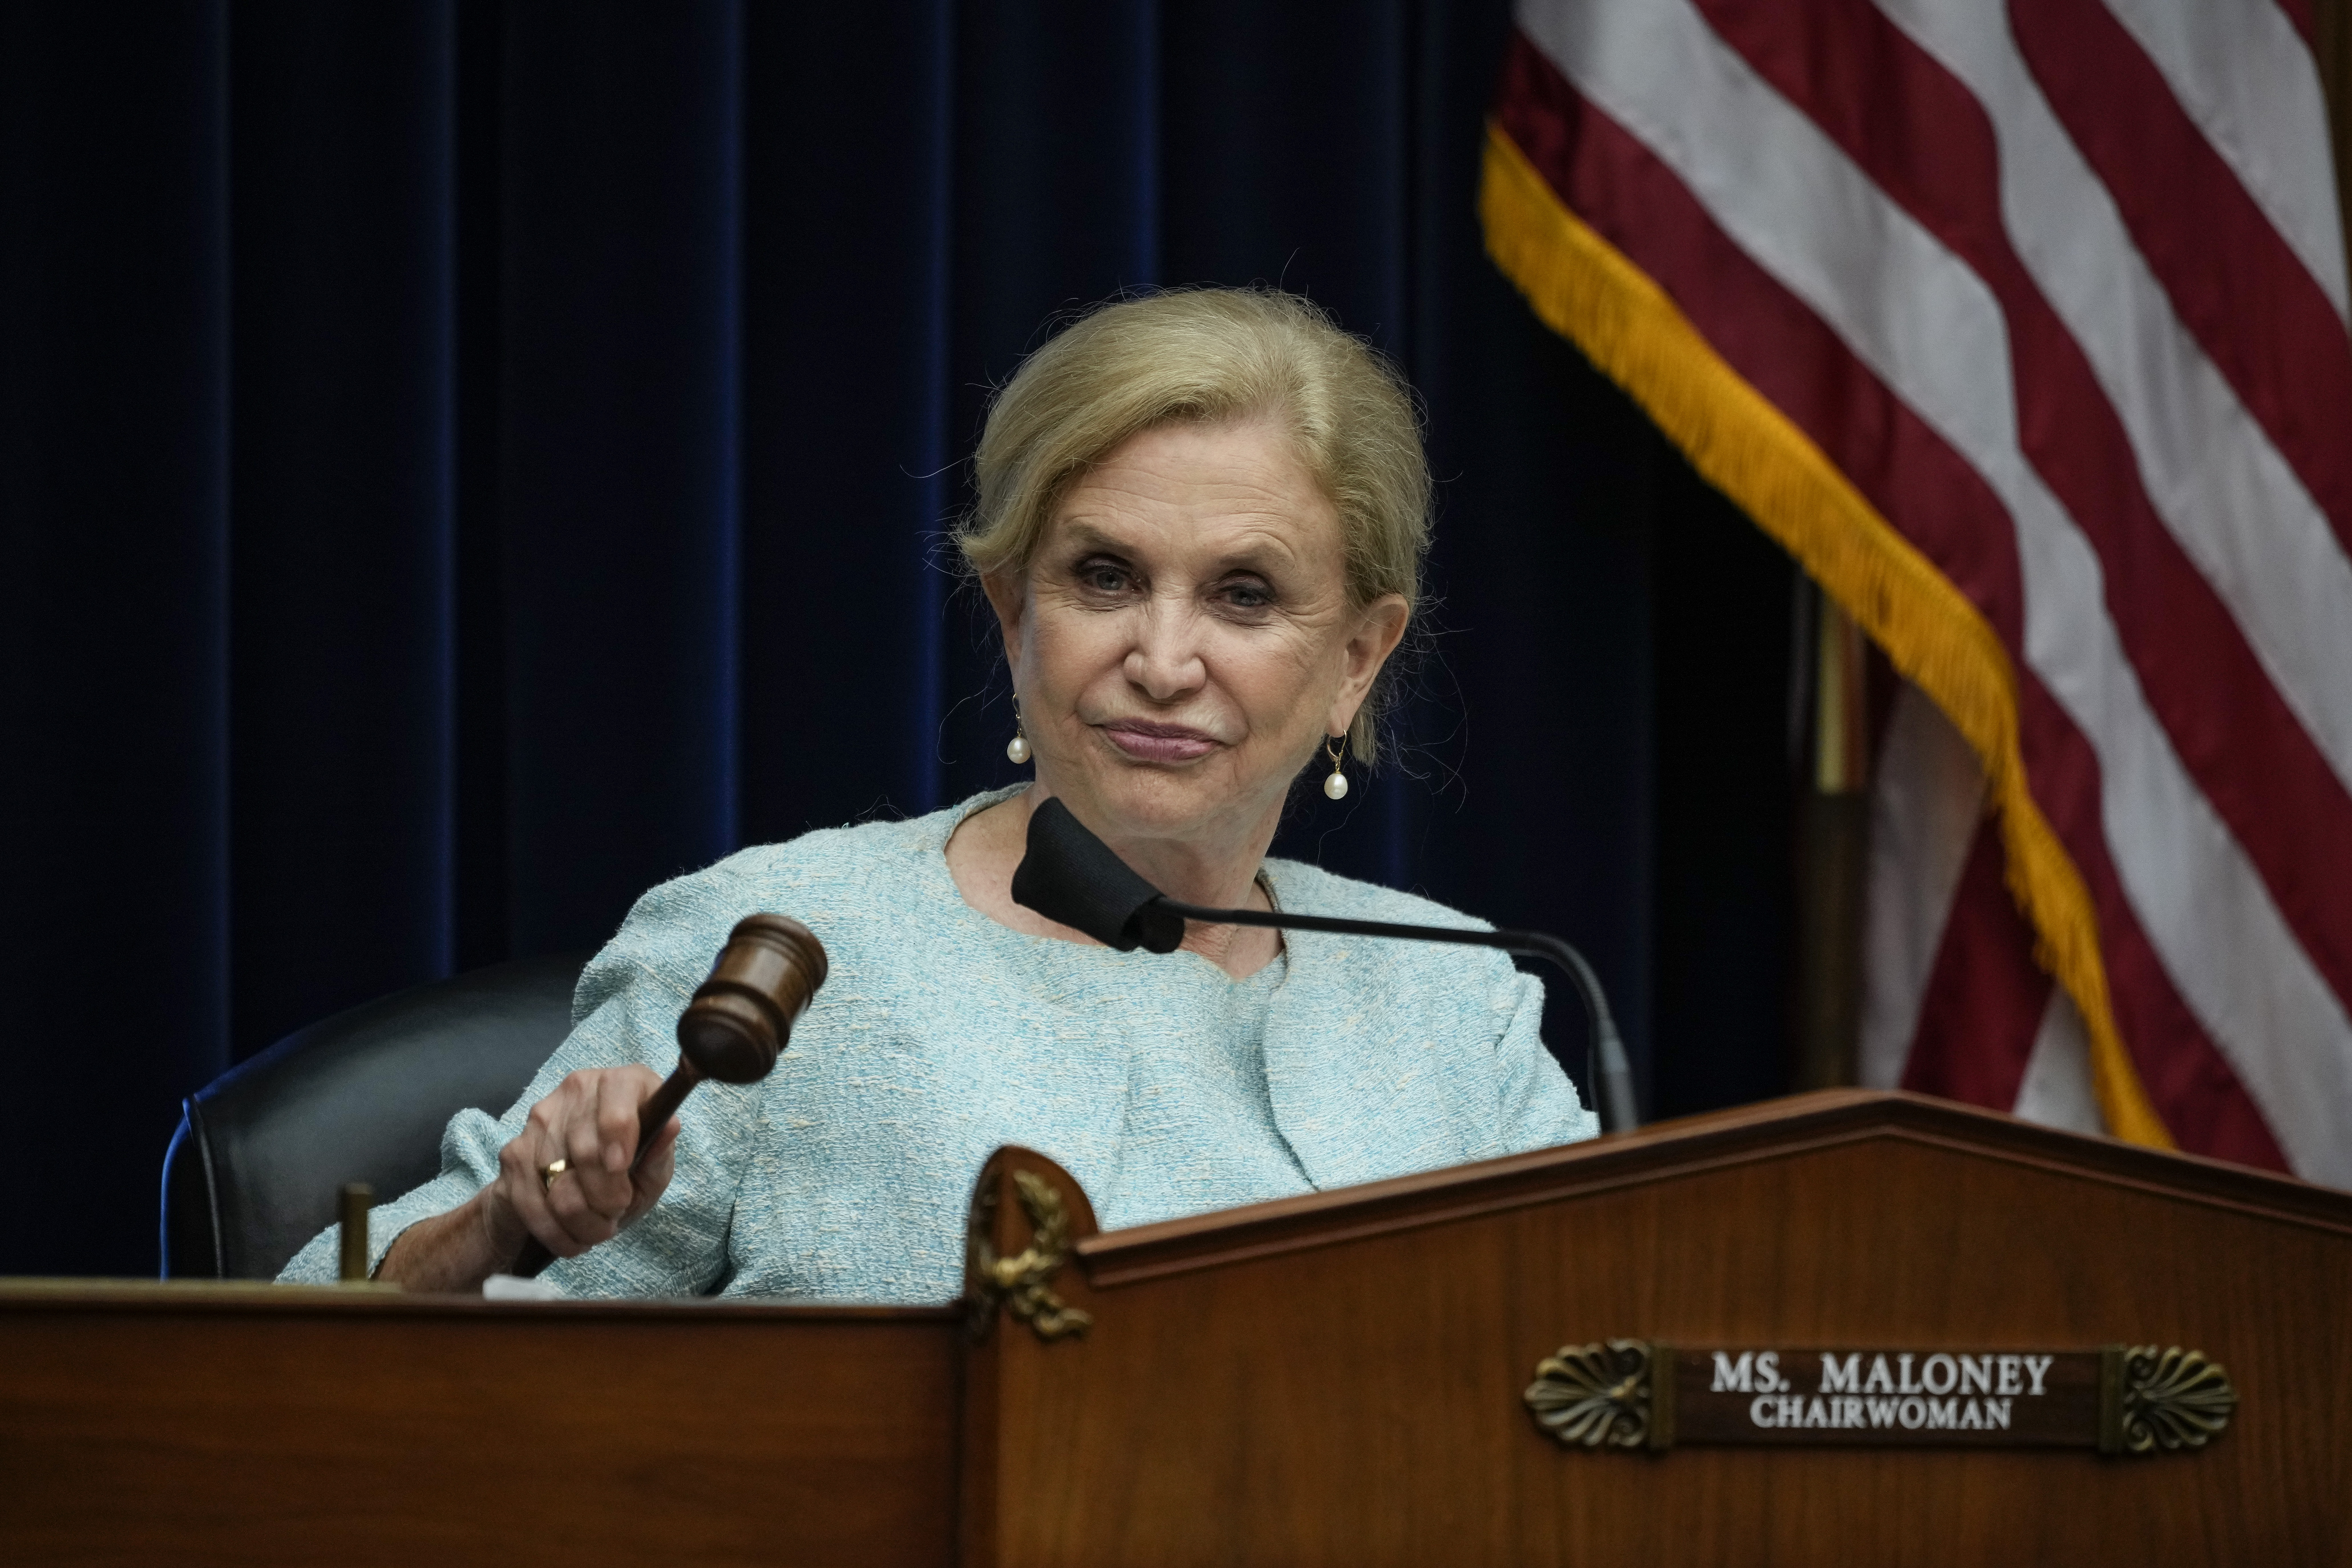 WASHINGTON, DC - JUNE 7: Committee chair Rep. Carolyn Maloney (D-NY) gavels in a hearing of the House Oversight Committee about infant deaths associated with the Rock 'n Play Sleeper sold by Fisher-Price, a subsidiary of Mattel, on Capitol Hill June 7, 2021 in Washington. A House Oversight Committee report released on Monday stated that Fisher-Price ignored safety issues with their Rock 'n Play sleeper. Over the past ten years, the product has been linked more than 30 infant deaths. (Photo by Drew Angerer/Getty Images)